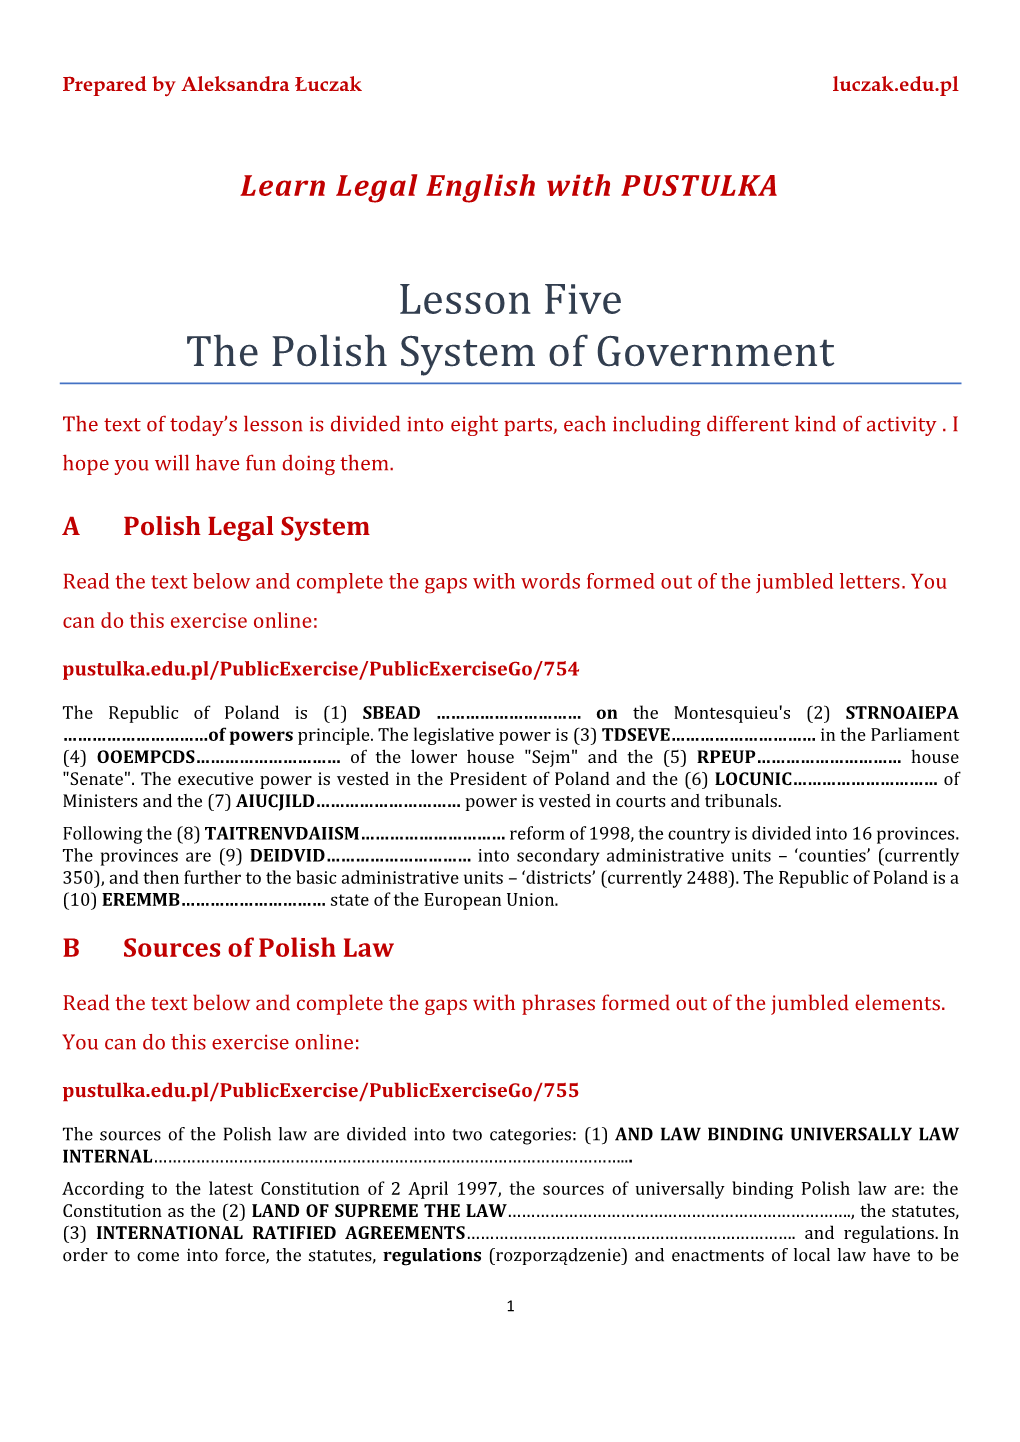 Lesson Five the Polish System of Government